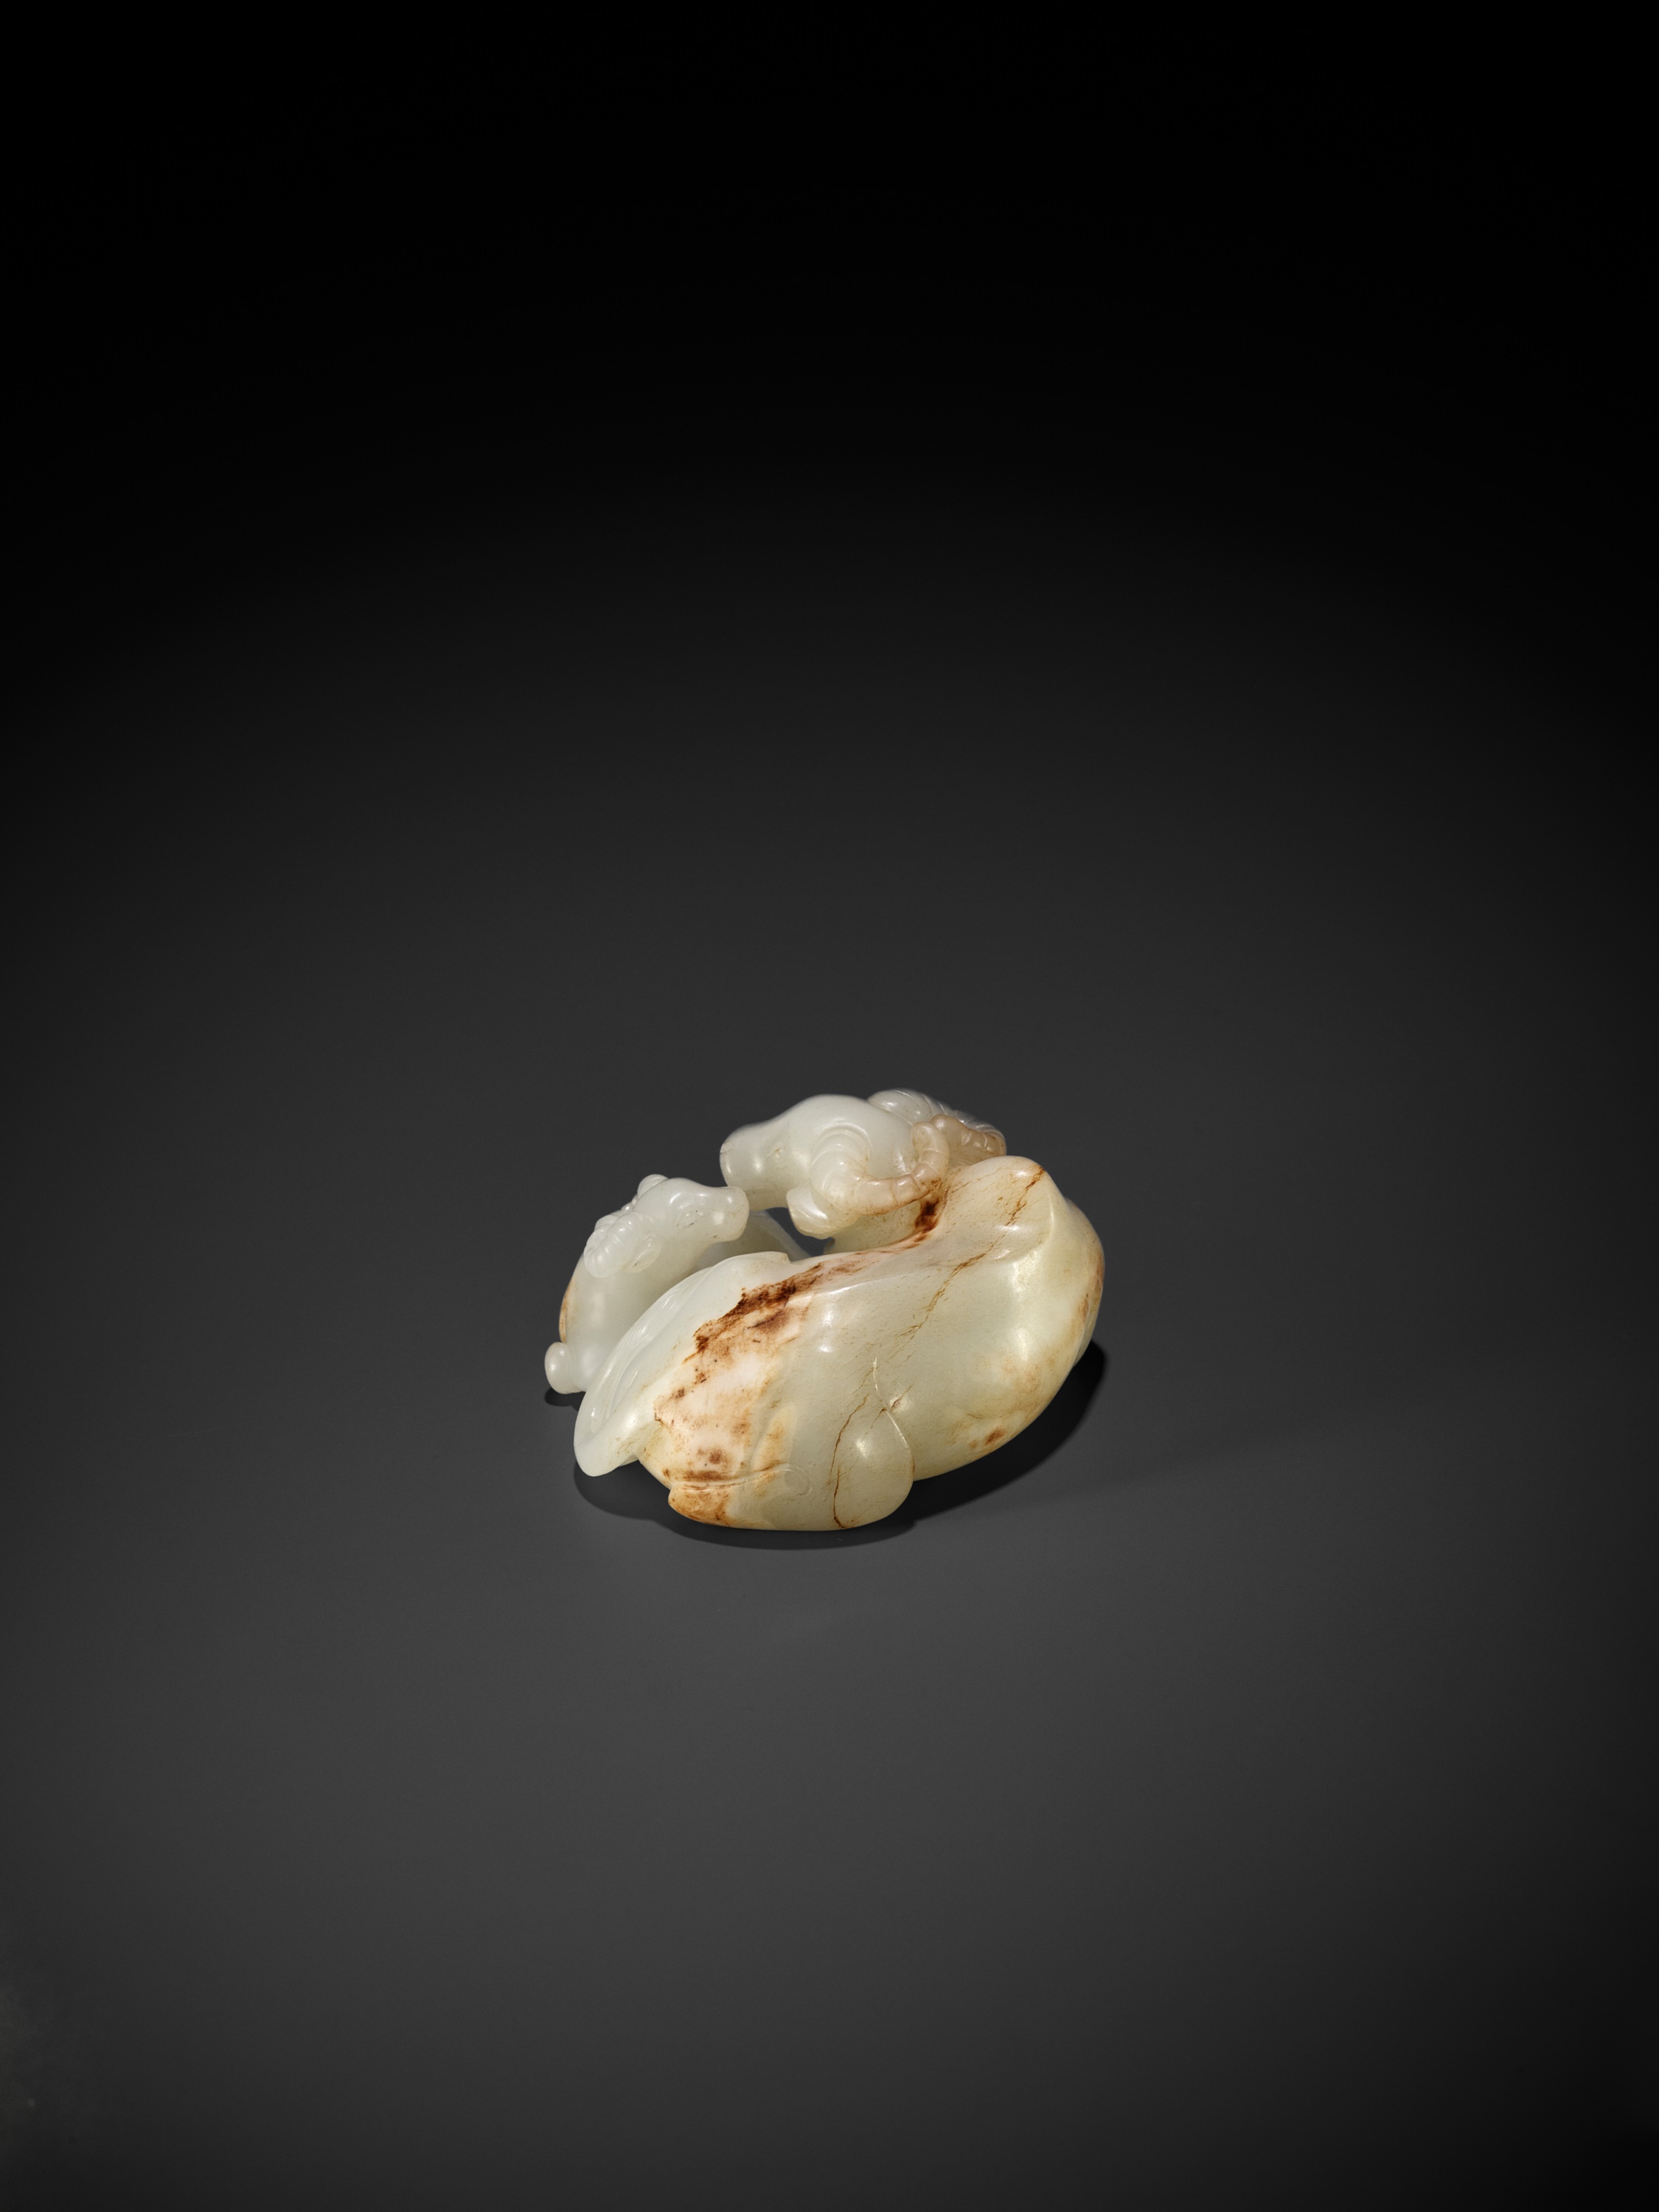 A WHITE AND RUSSET JADE GROUP OF A WATER BUFFALO AND A CALF, 18TH - 19TH CENTURY - Image 8 of 10